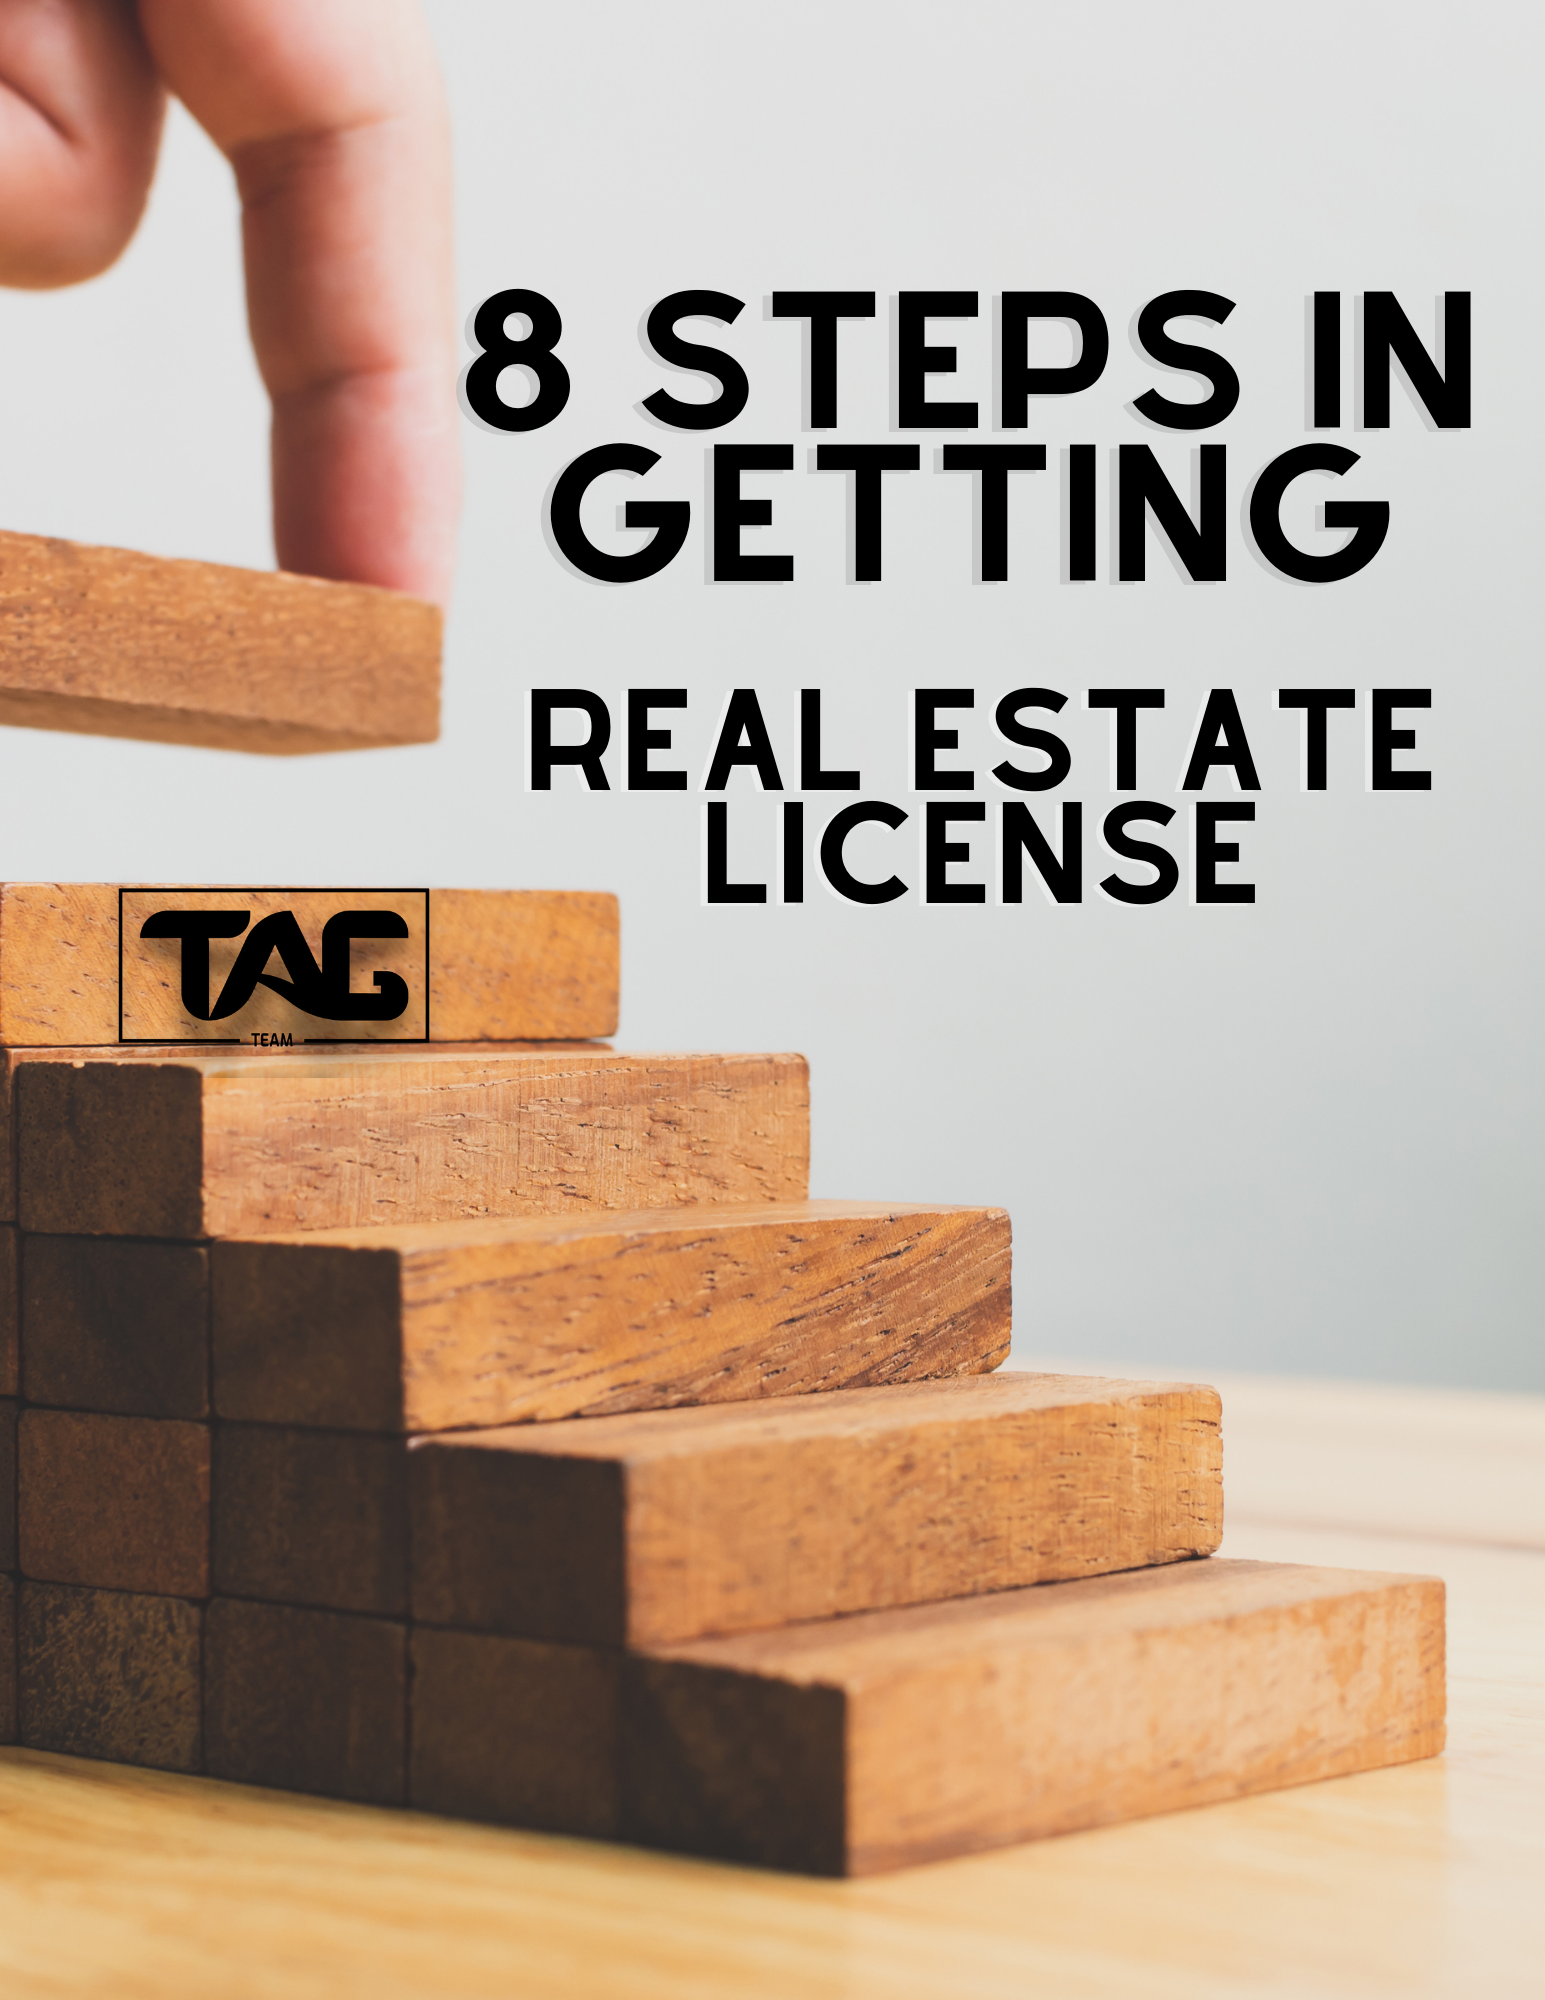 8 Steps in Getting Real Estate License